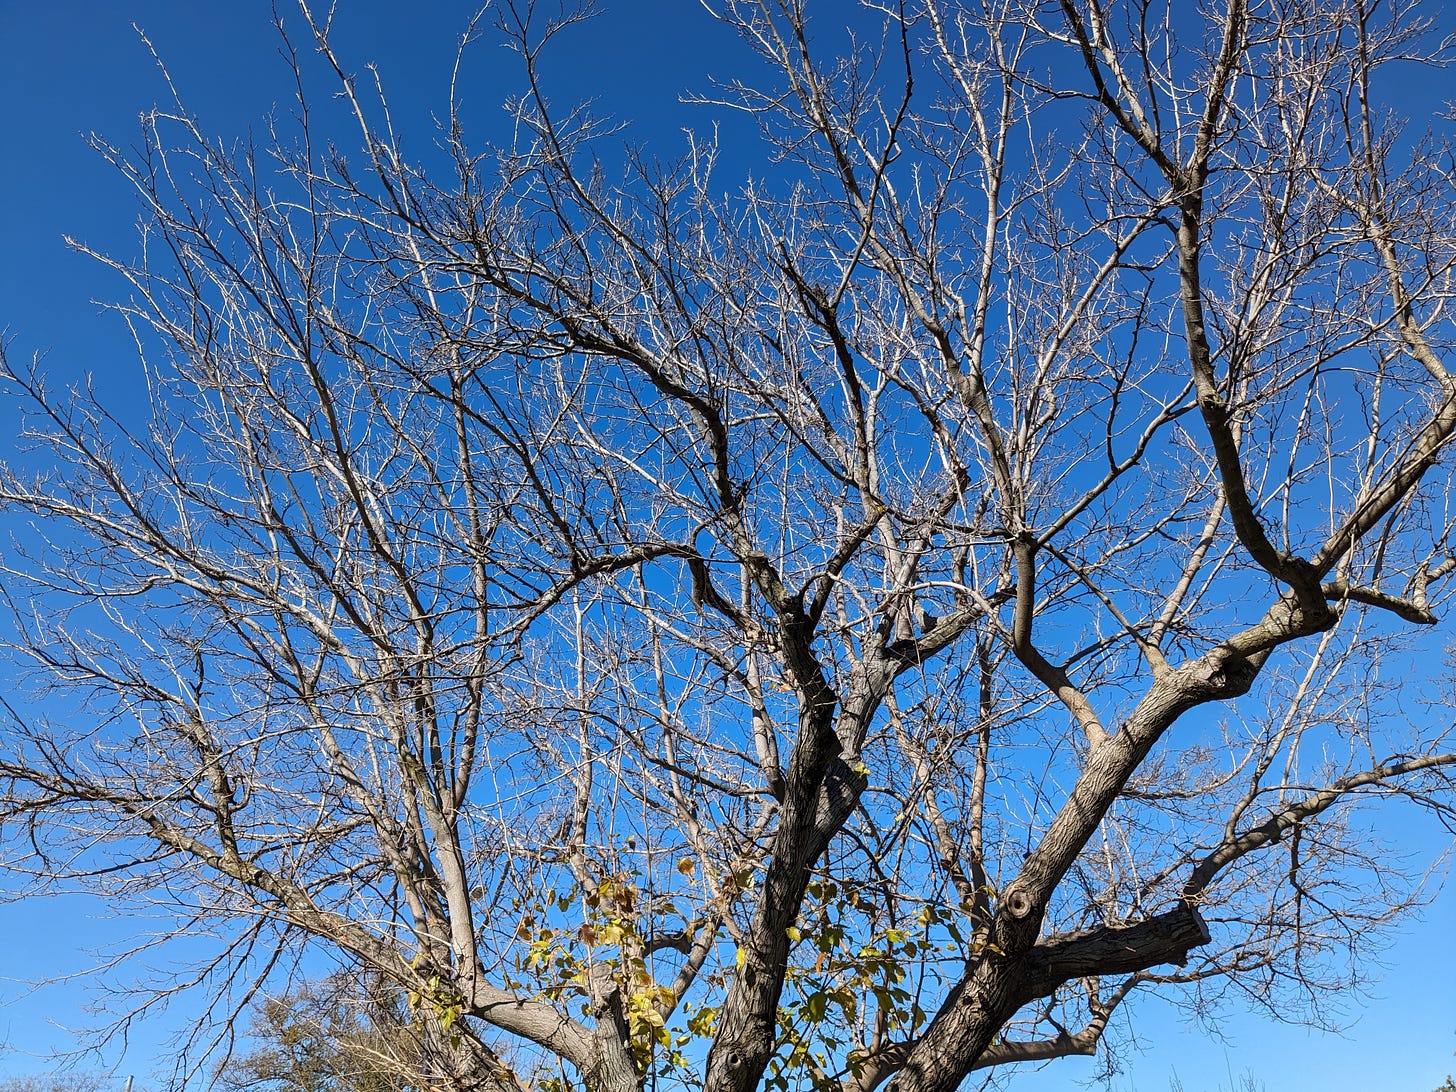 Texas; bare branches cutting up the sky